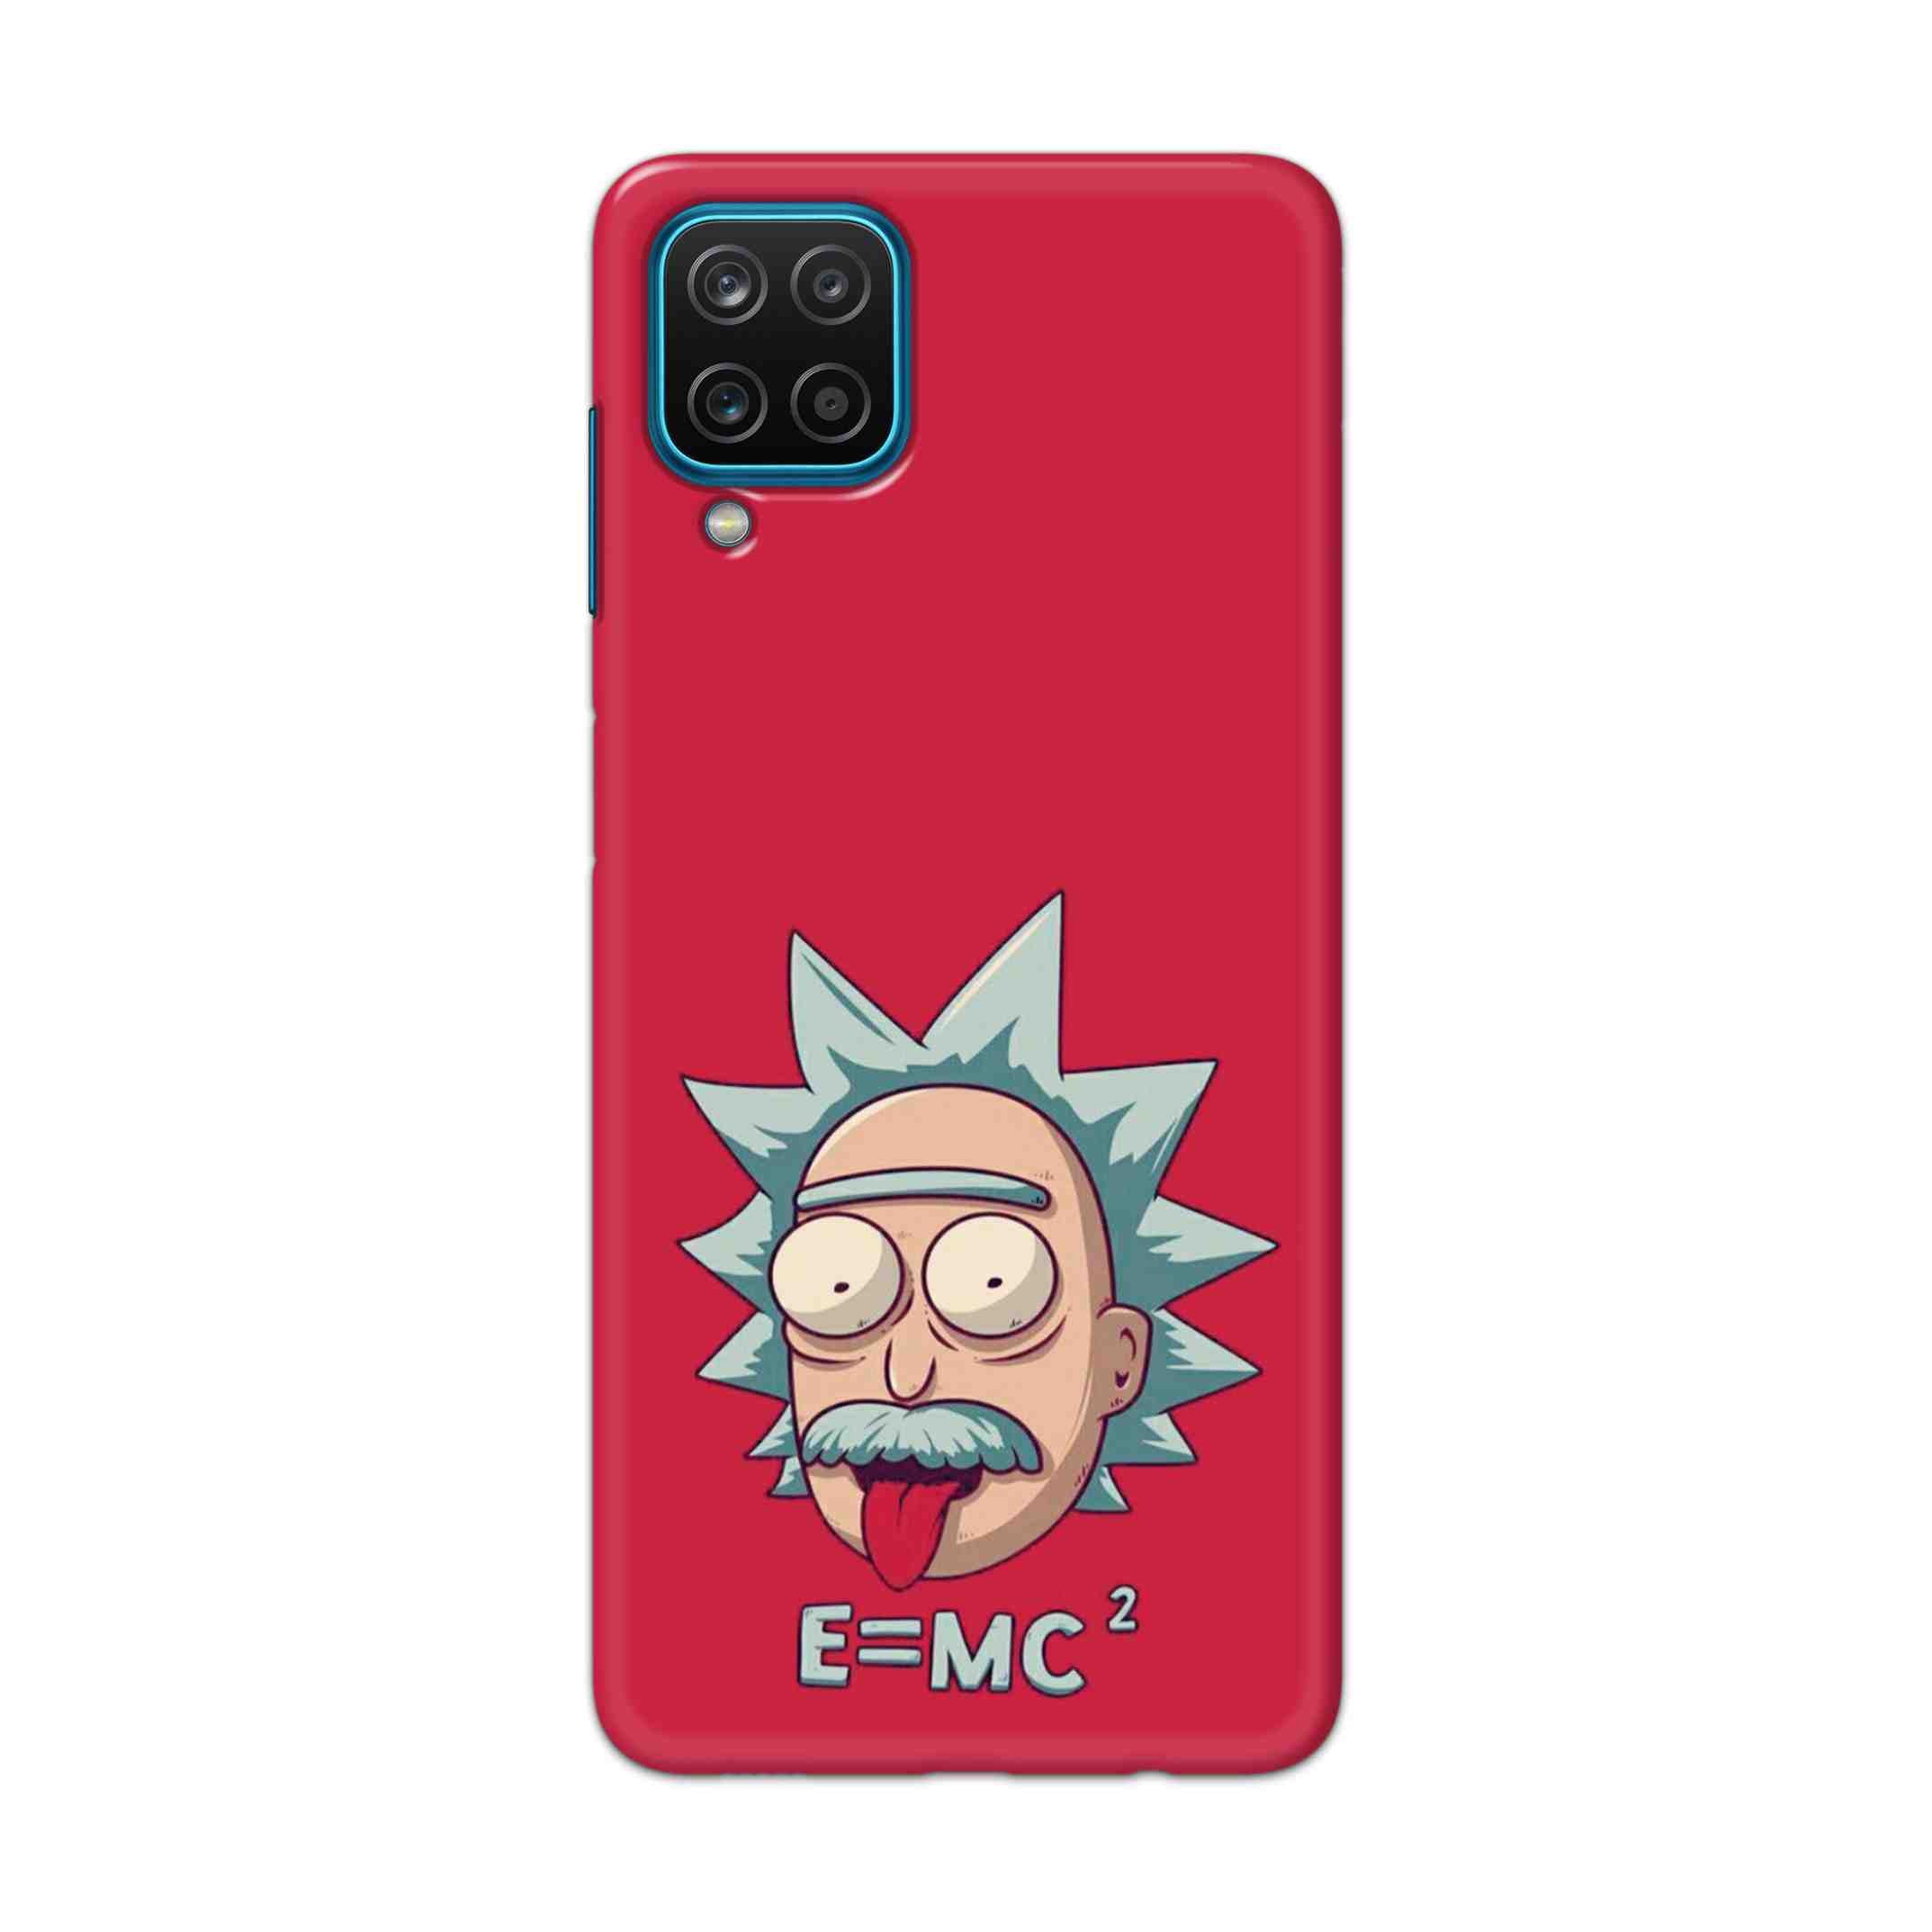 Buy E=Mc Hard Back Mobile Phone Case Cover For Samsung Galaxy A12 Online